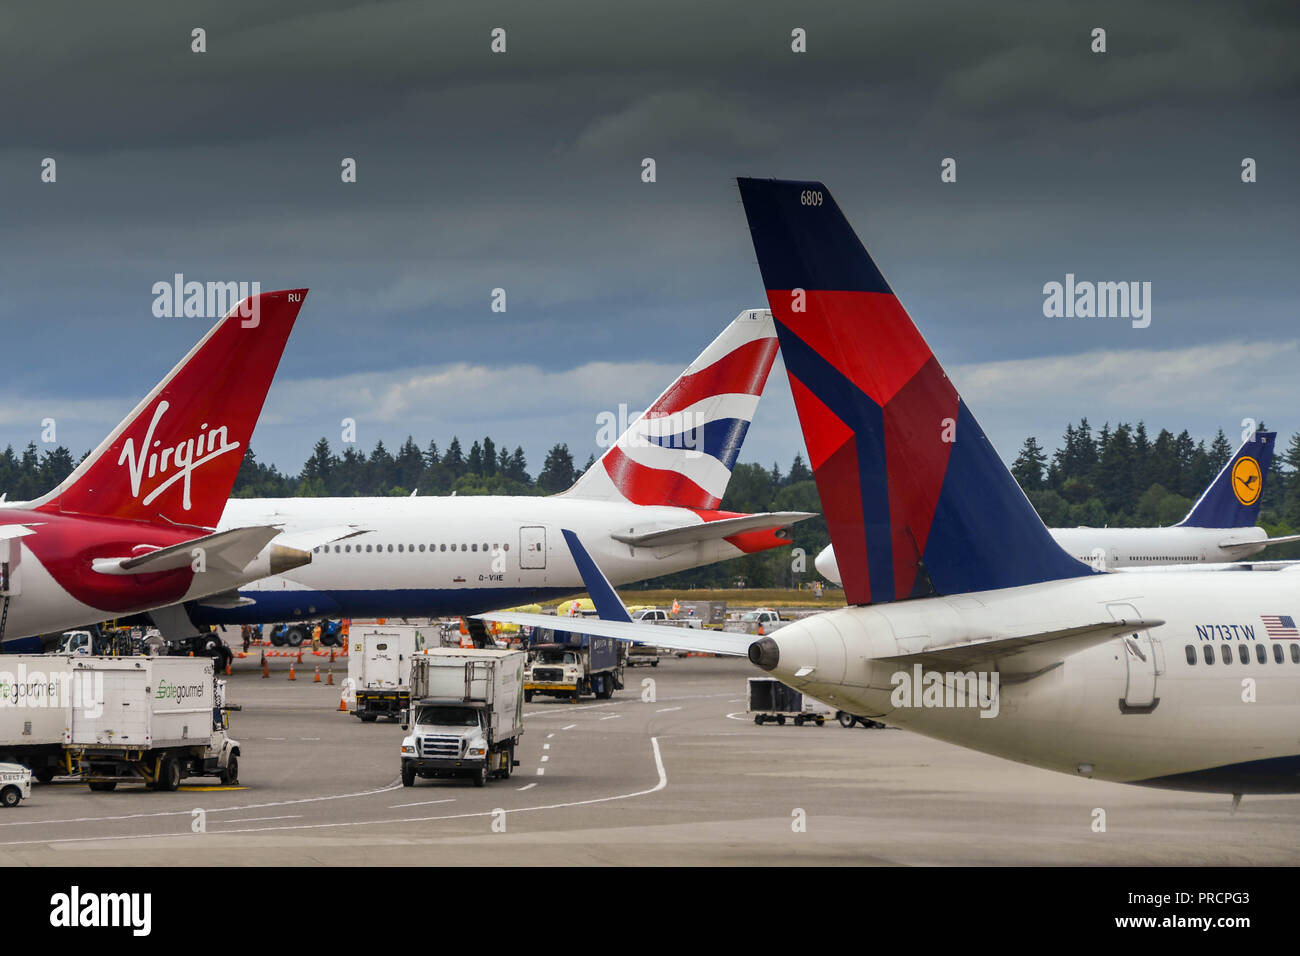 SEATTLE TACOMA AIRPORT, WA, USA - JUNE 2018: Tail fins of aircraft operated by British Airways, Virgin Atlantic and Delta Airlines at Seattle Tacoma a Stock Photo